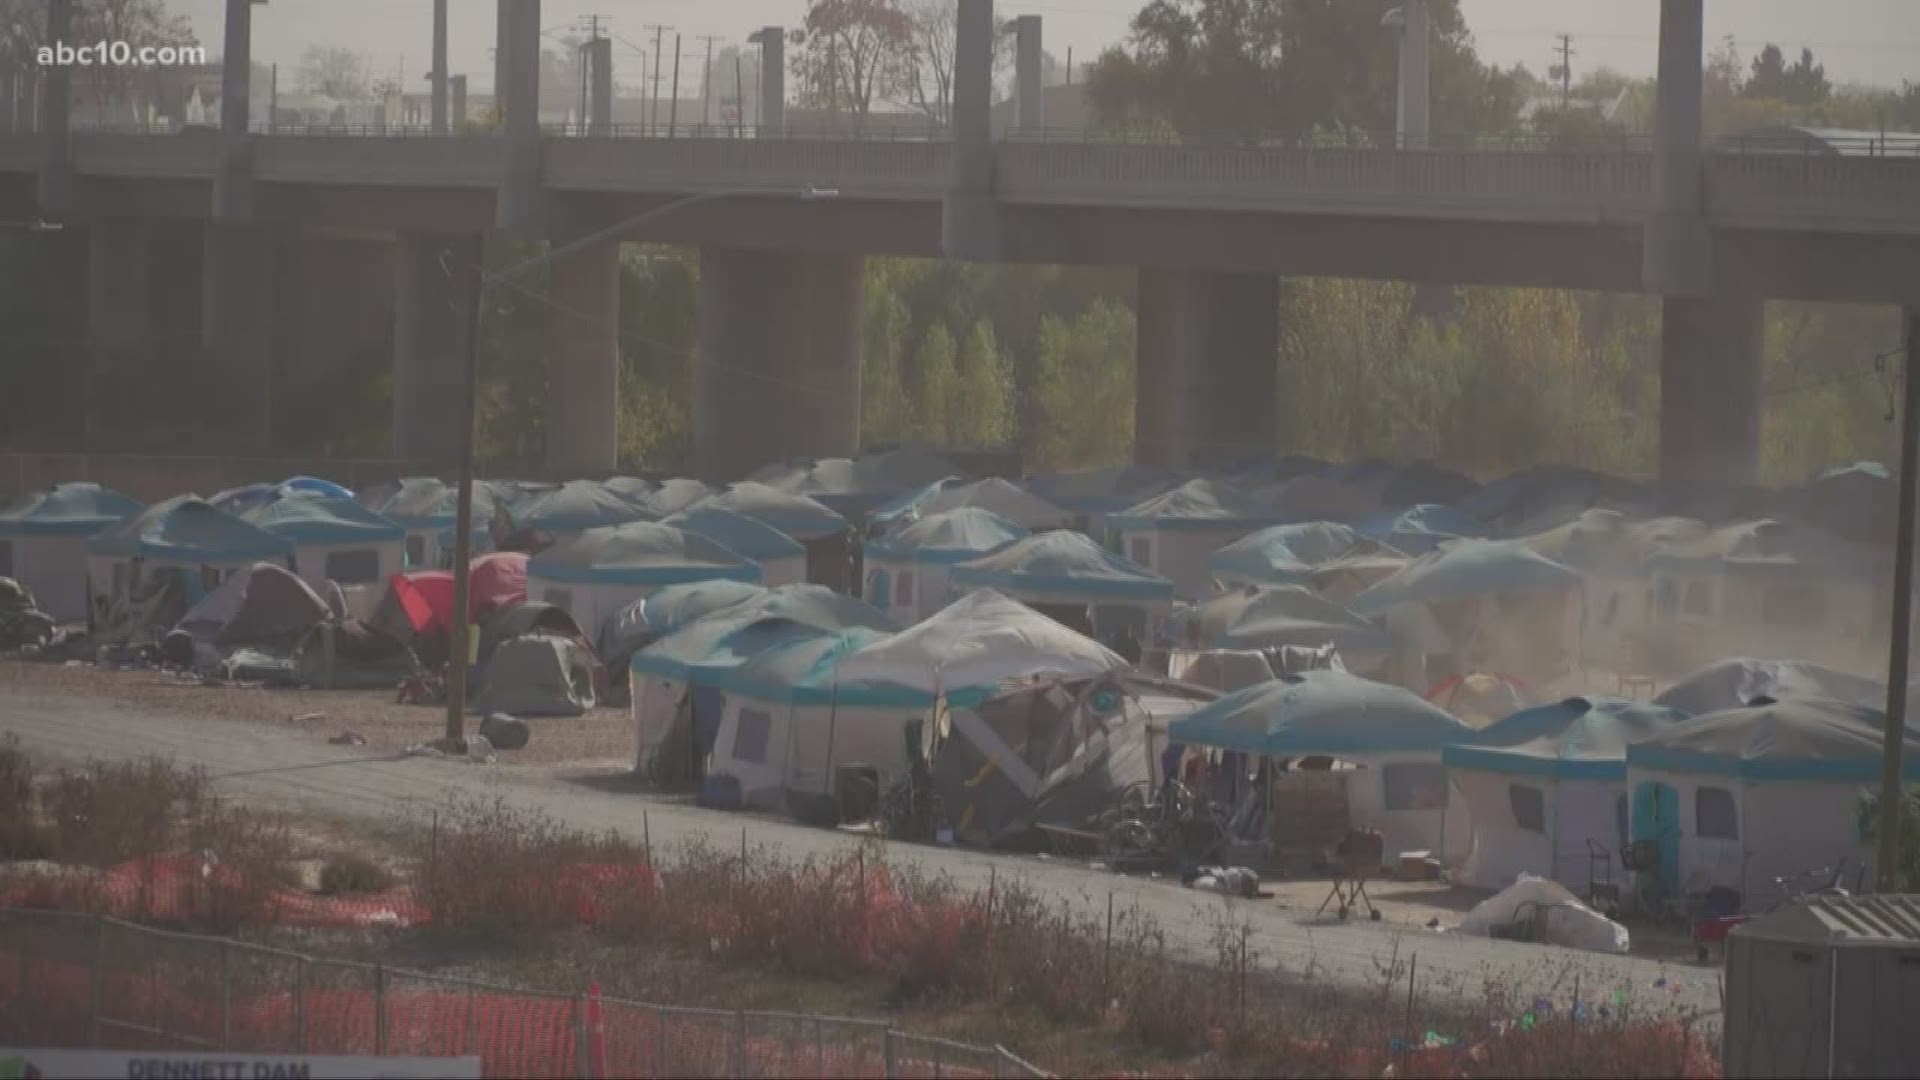 The Modesto Outdoor Emergency Shelter (MOES) is closing and in groups of 25, homeless people are being moved into a new indoor shelter starting on Tuesday morning.